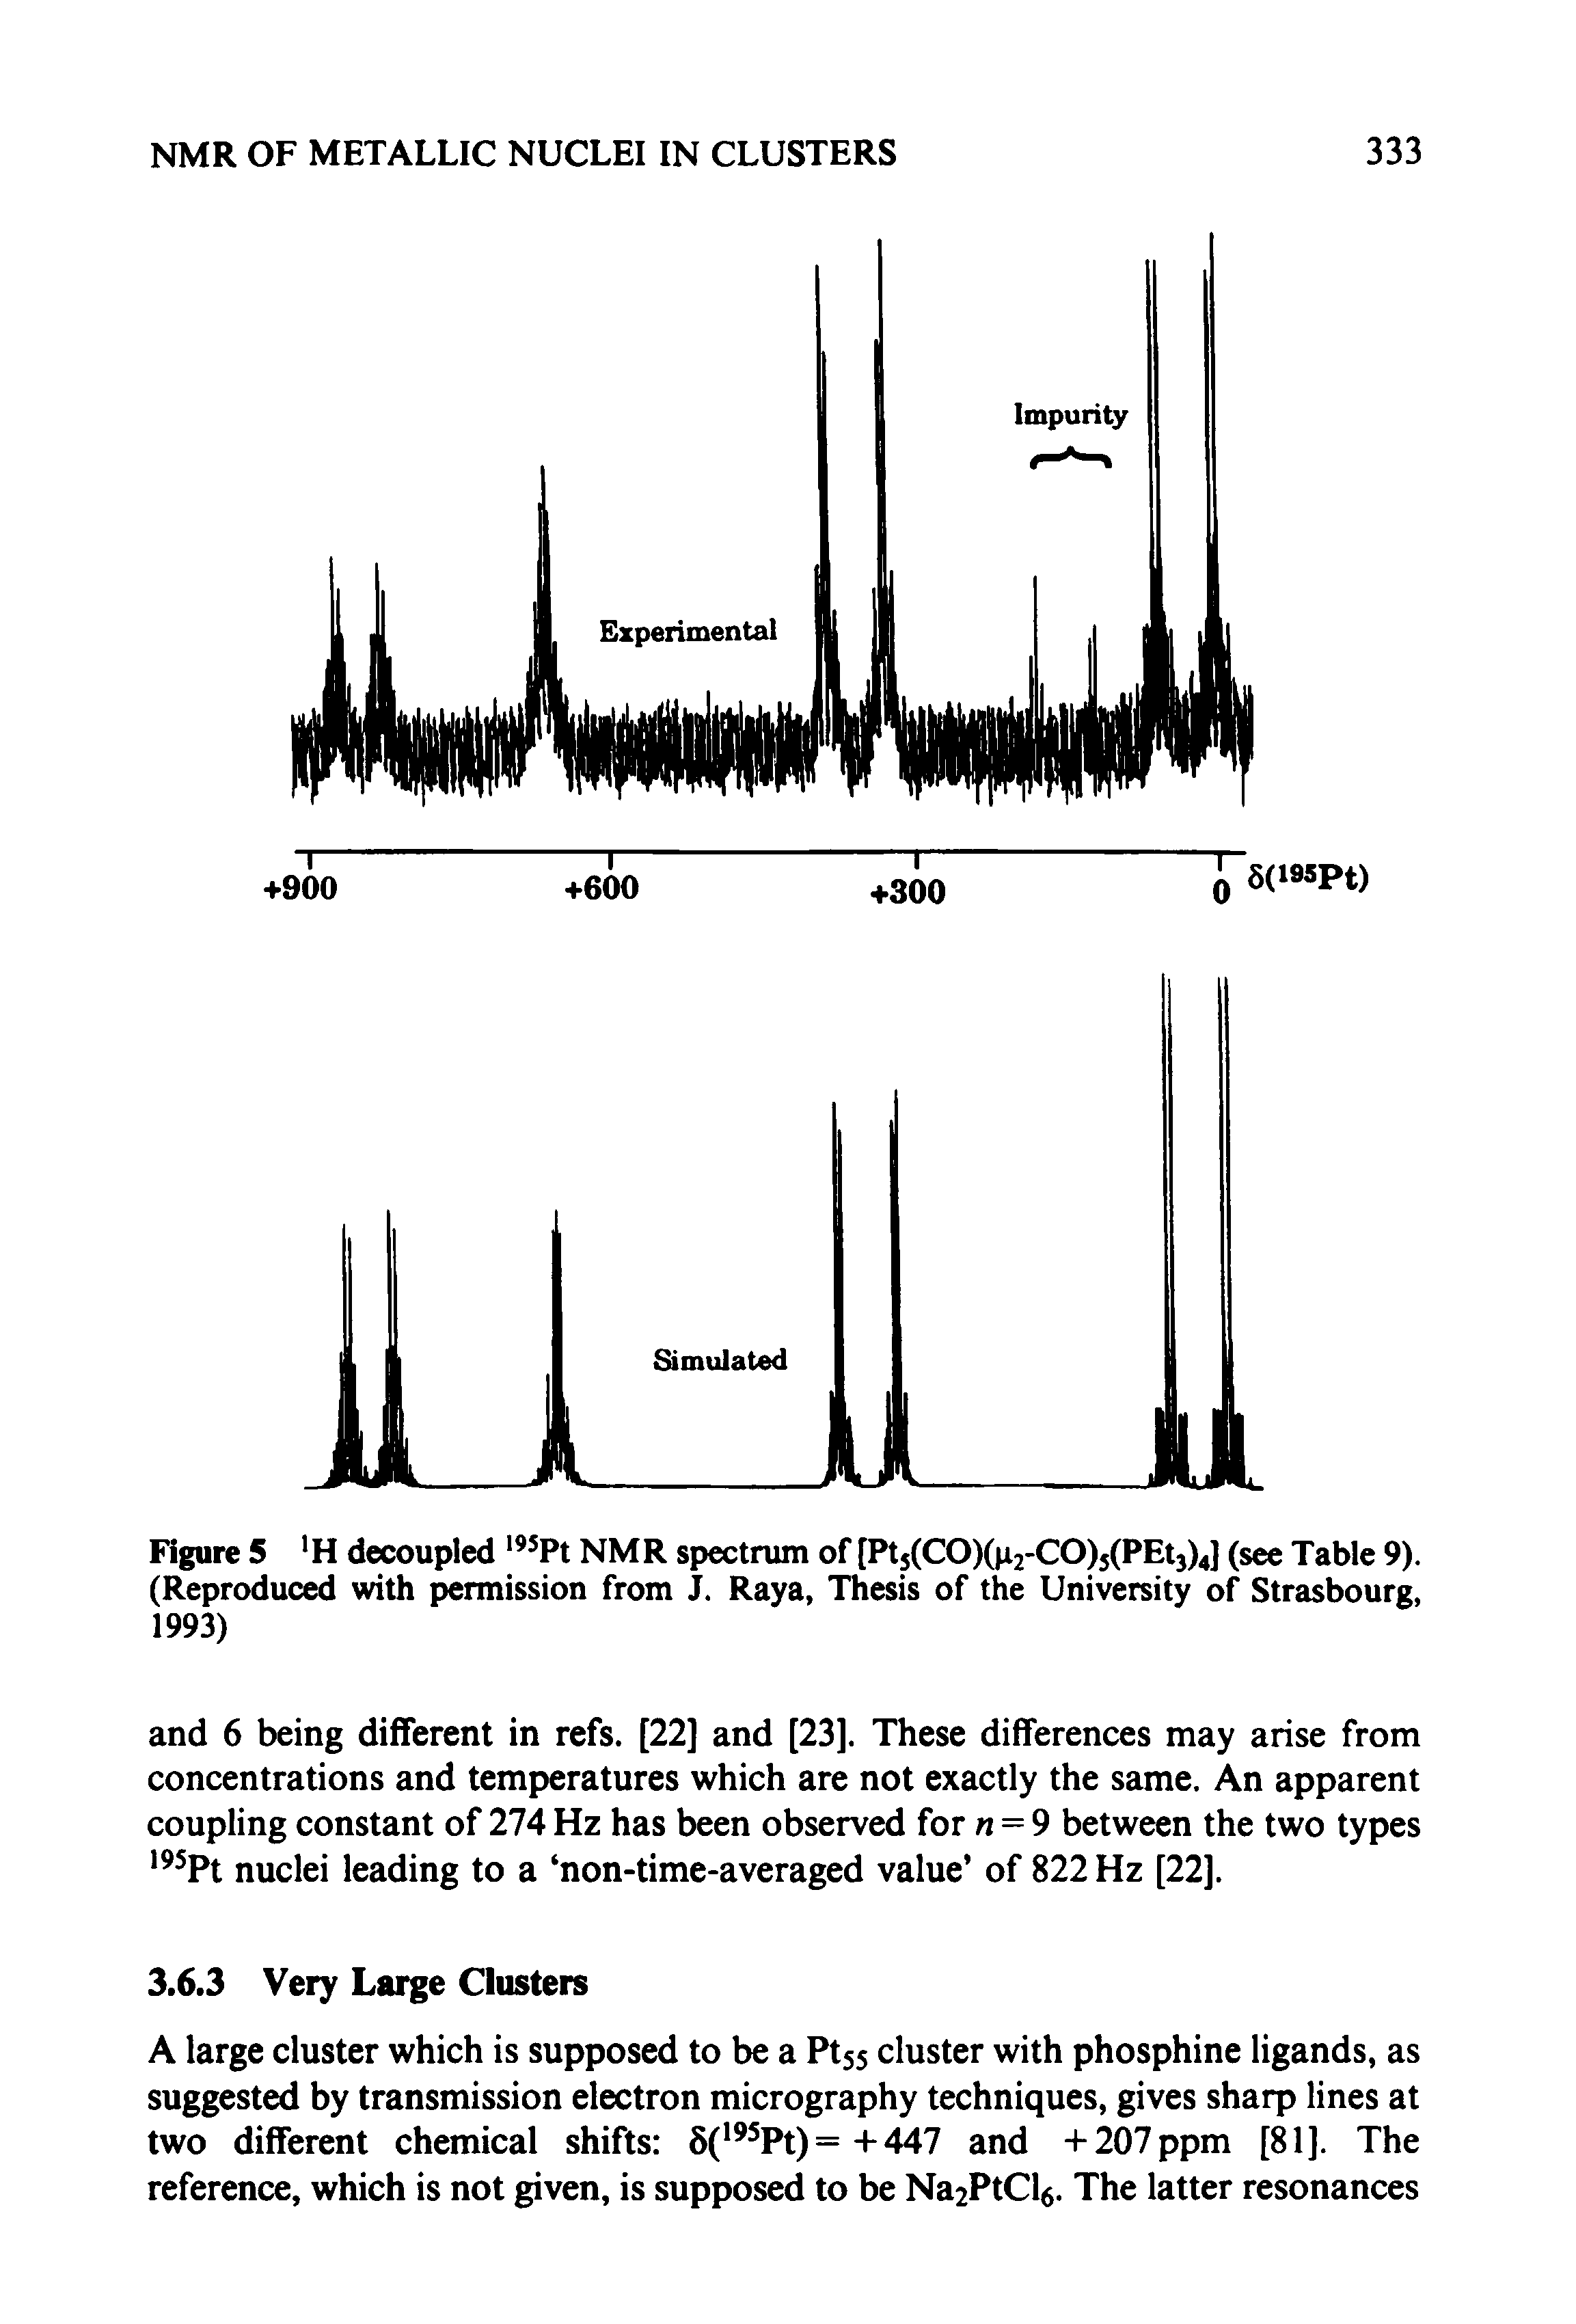 Figure 5 H decoupled NMR spectrum of [Pt5(CO)(p2-CO)5(PEt3)4] (see Table 9). (Reproduced with permission from J. Raya, Thesis of the University of Strasbourg, 1993)...